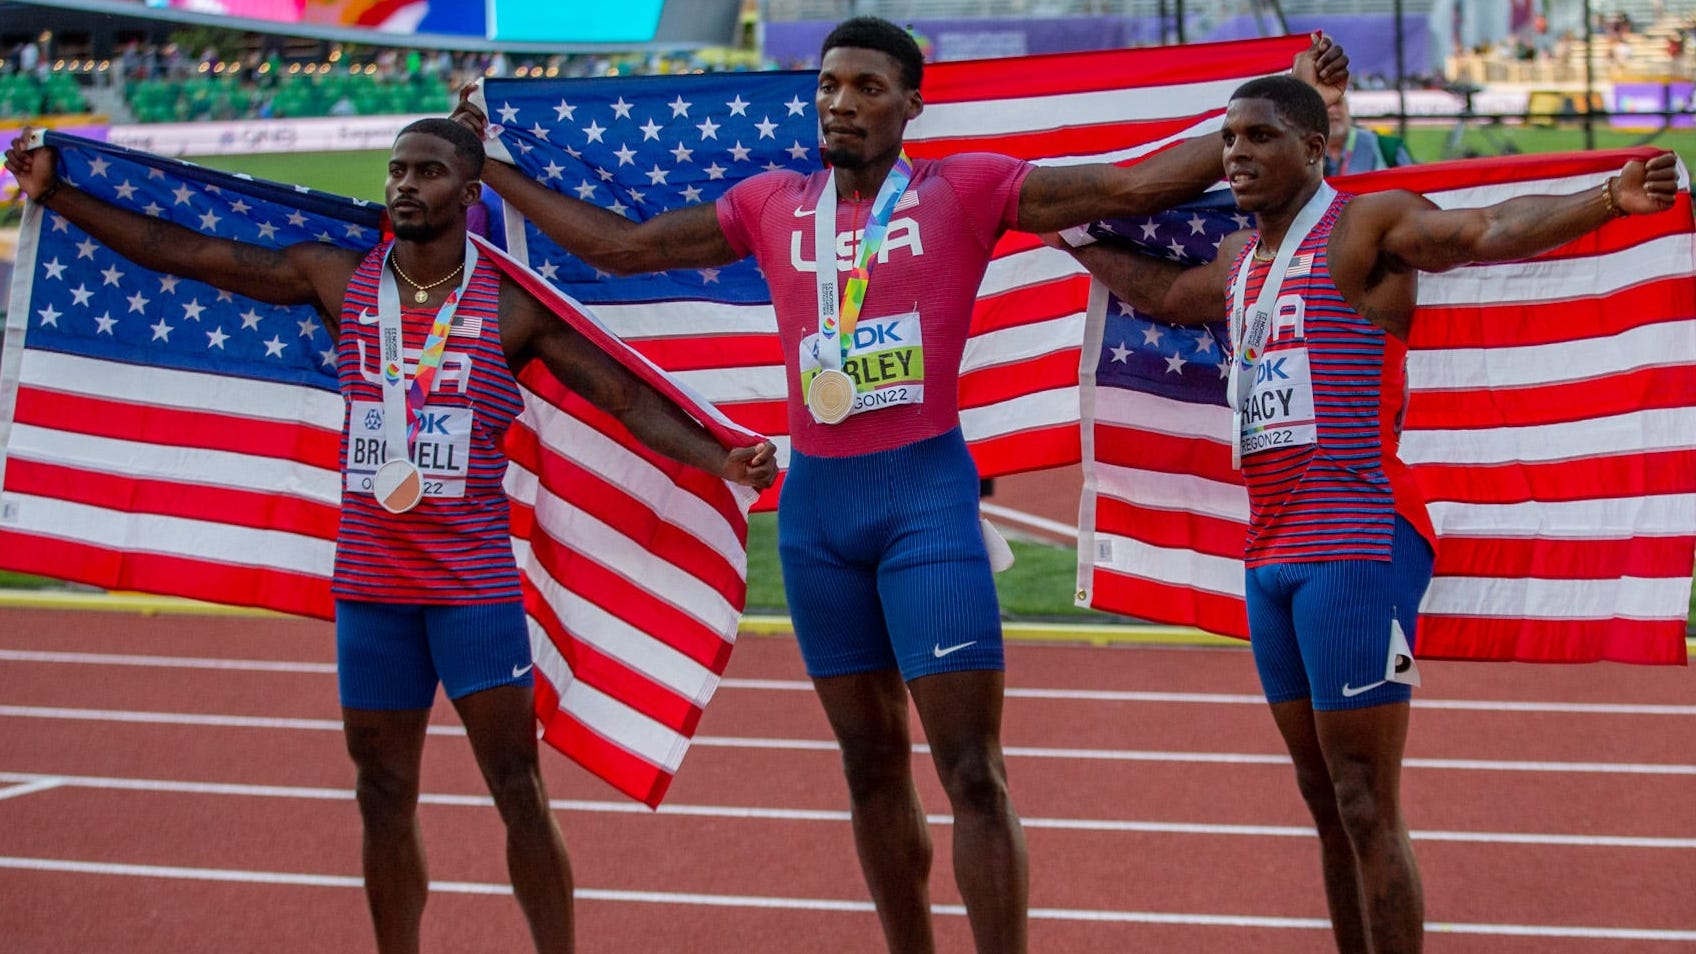 fred-kerley-leads-us-sweep-in-men-s-100-meter-final-at-track-and-field-world-championships